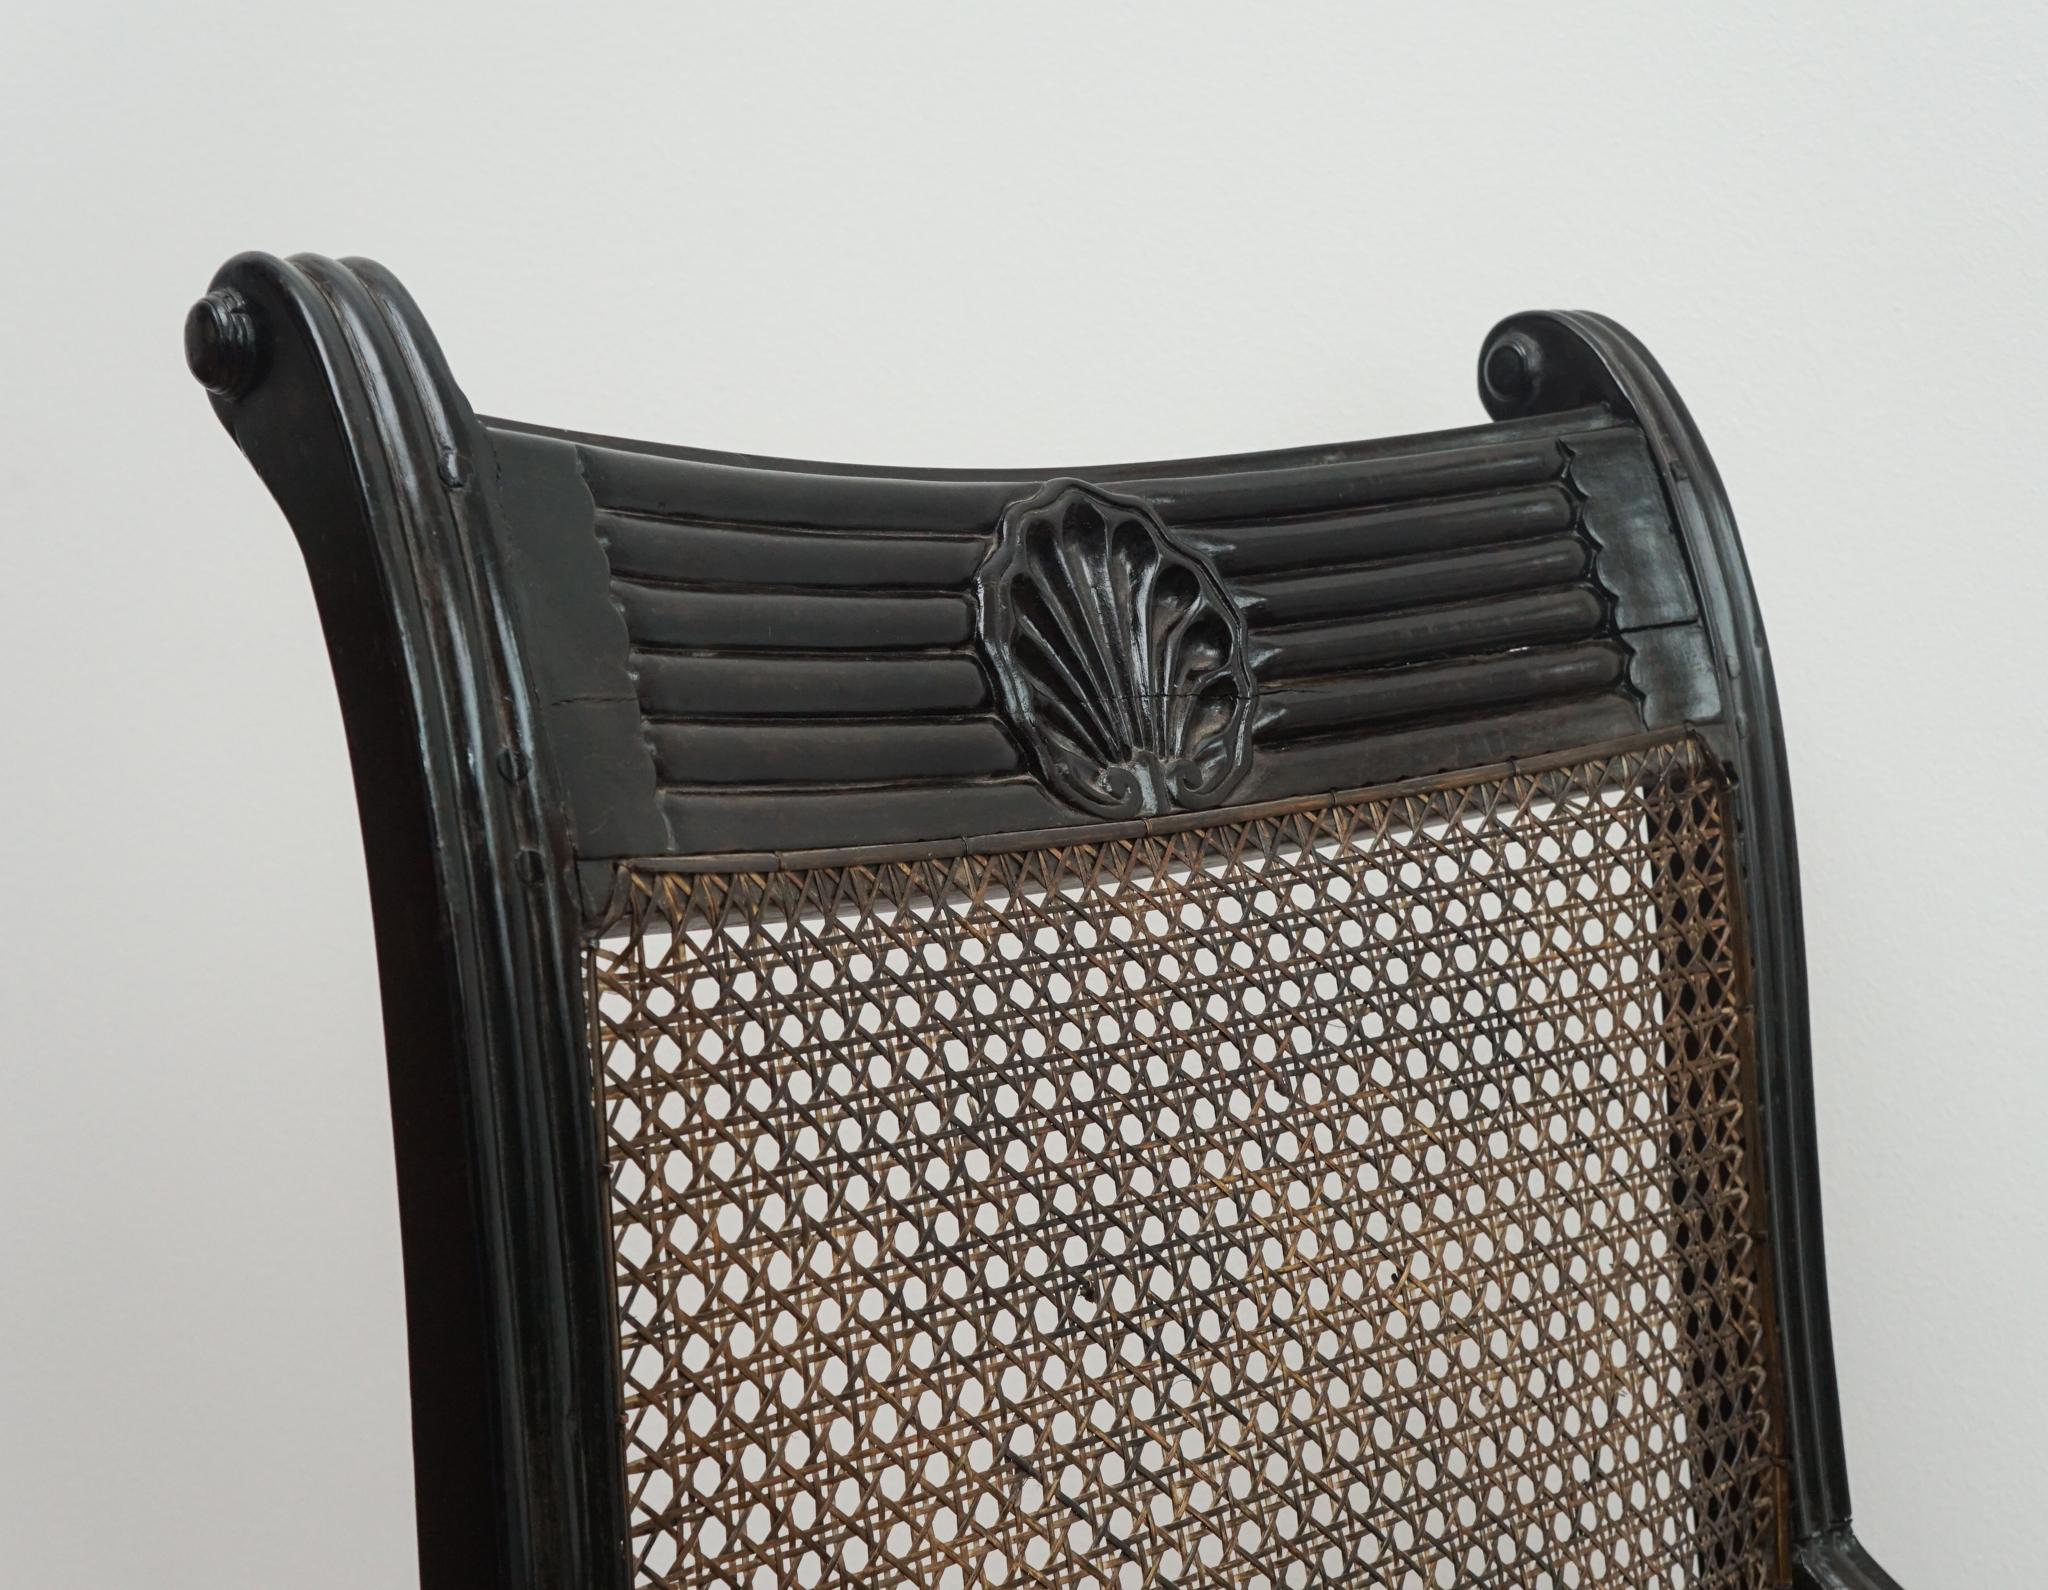 The Grandfather shell mark chair, shown here, is from Ceylon, circa 1820.  Featuring an exquisite carved ebony frame—distinguished with a shell mark detail on the top rail—and hand-caned seat and back, the chair represents classic Dutch Anglo-Indian